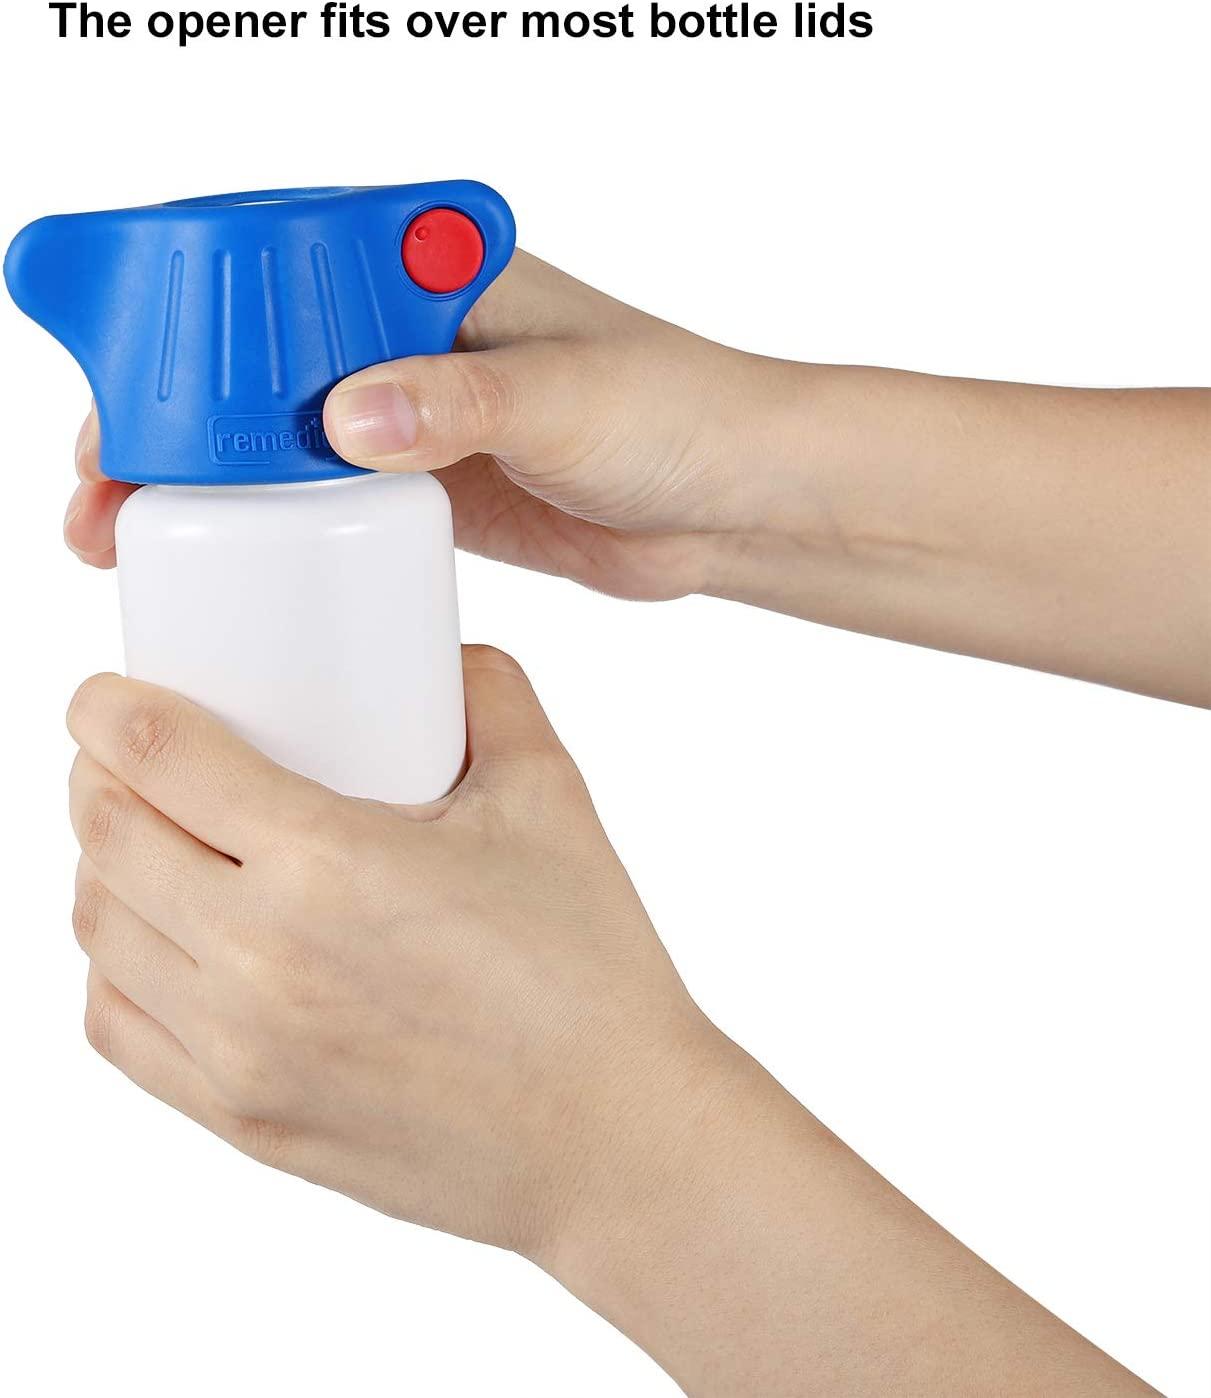 Mini-GRIP can be used as a water bottle opener, a pil bottle